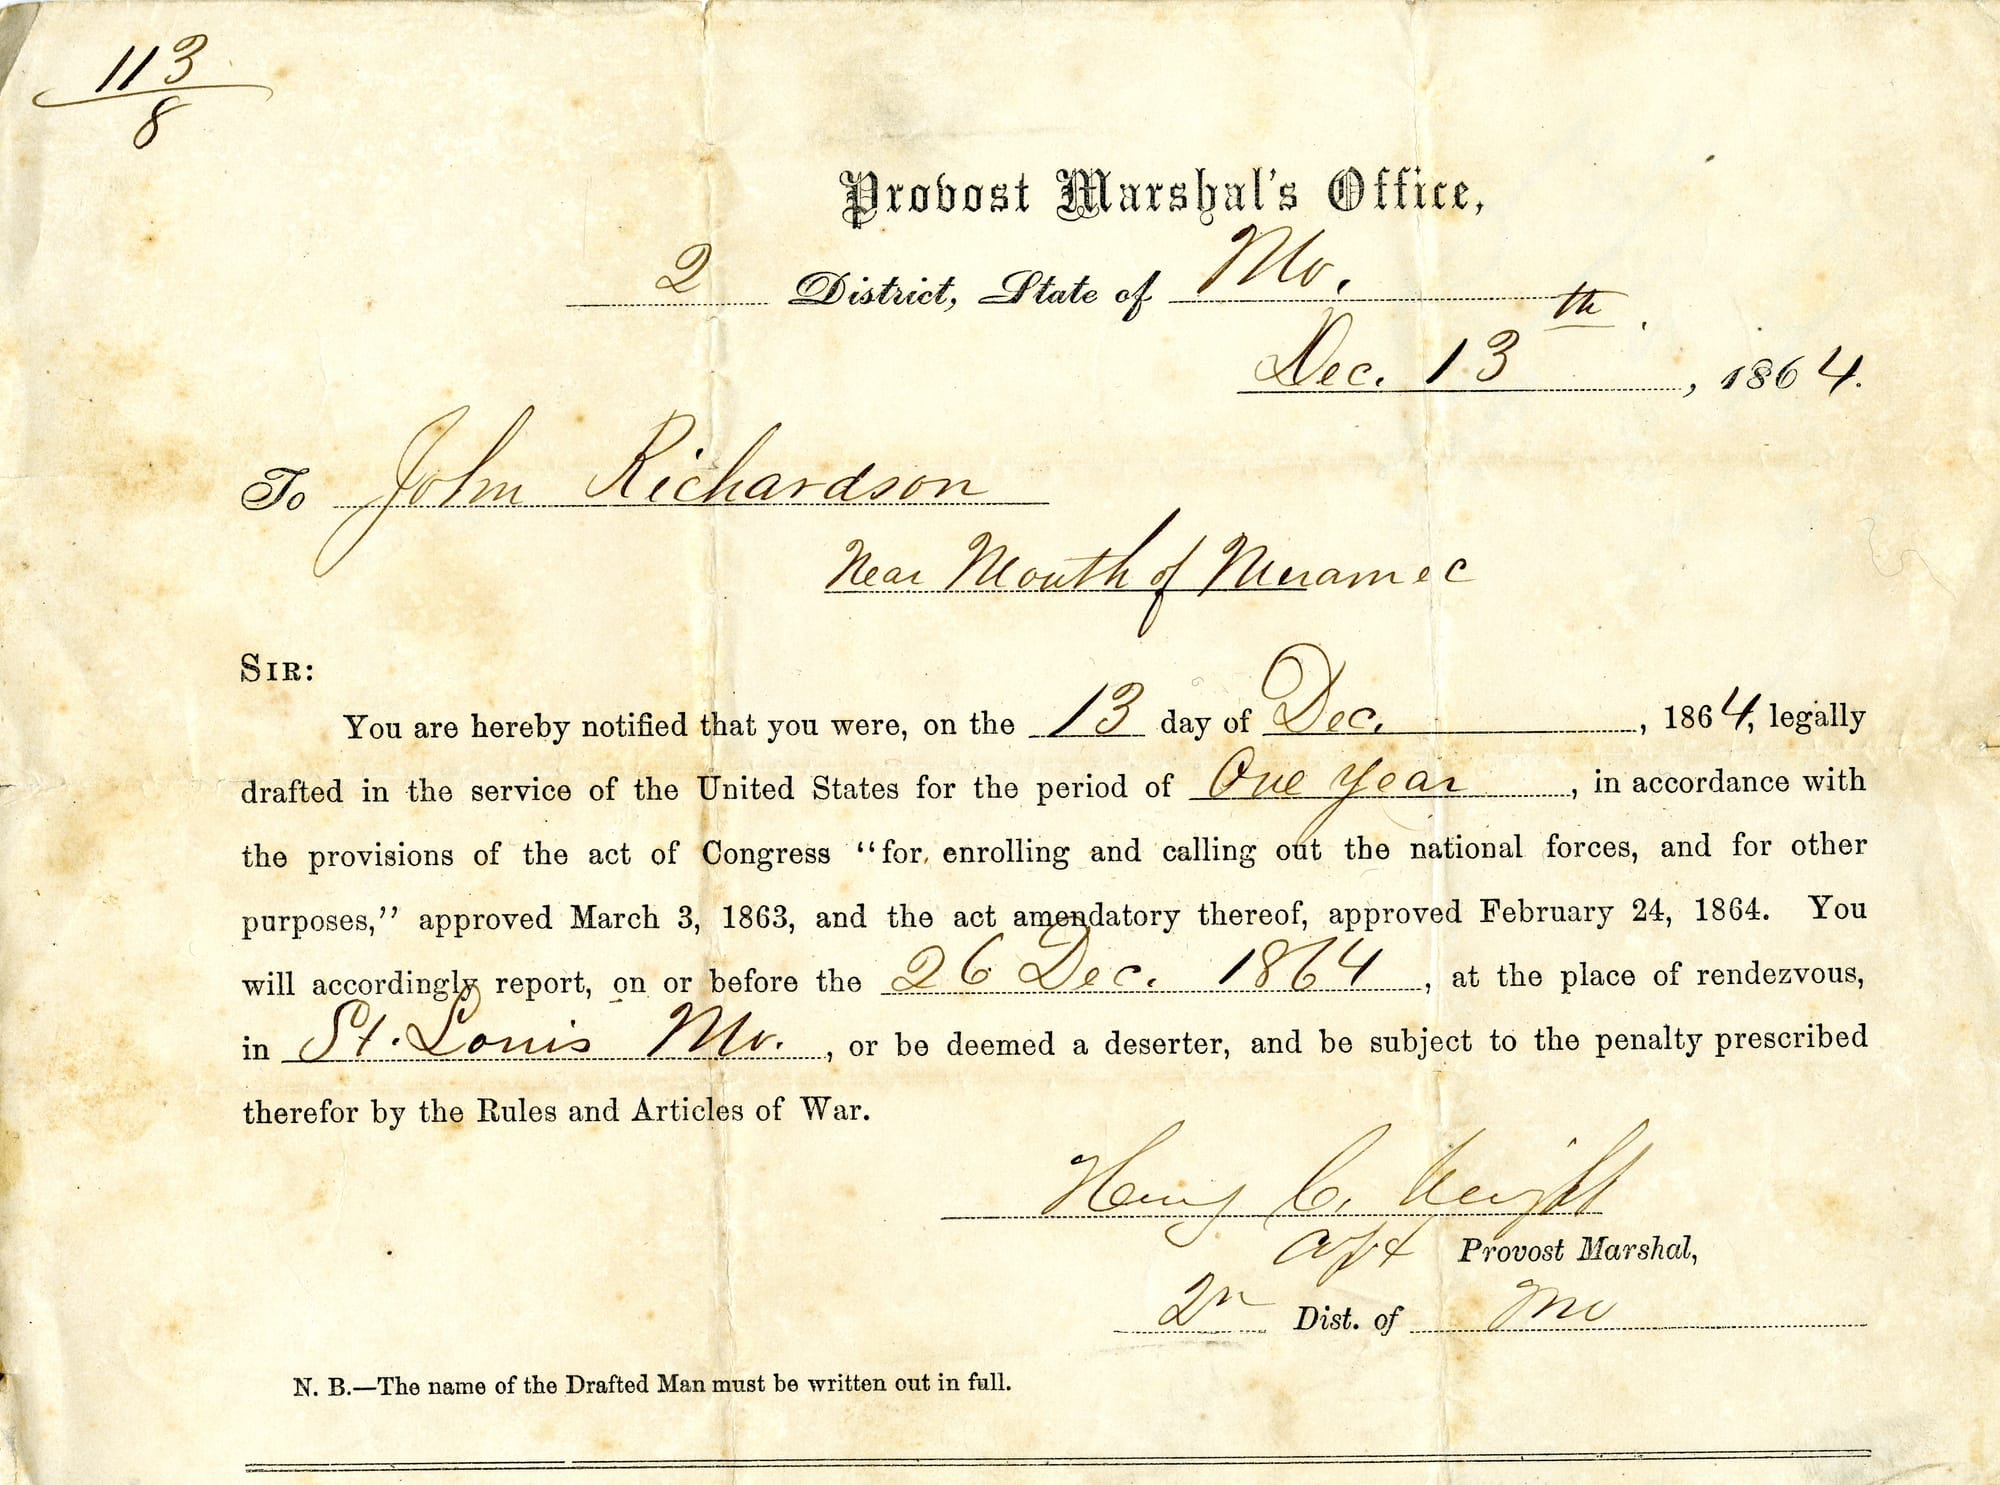 Records of Conscientious Objectors, Deserters, and Substitutes During the Civil War